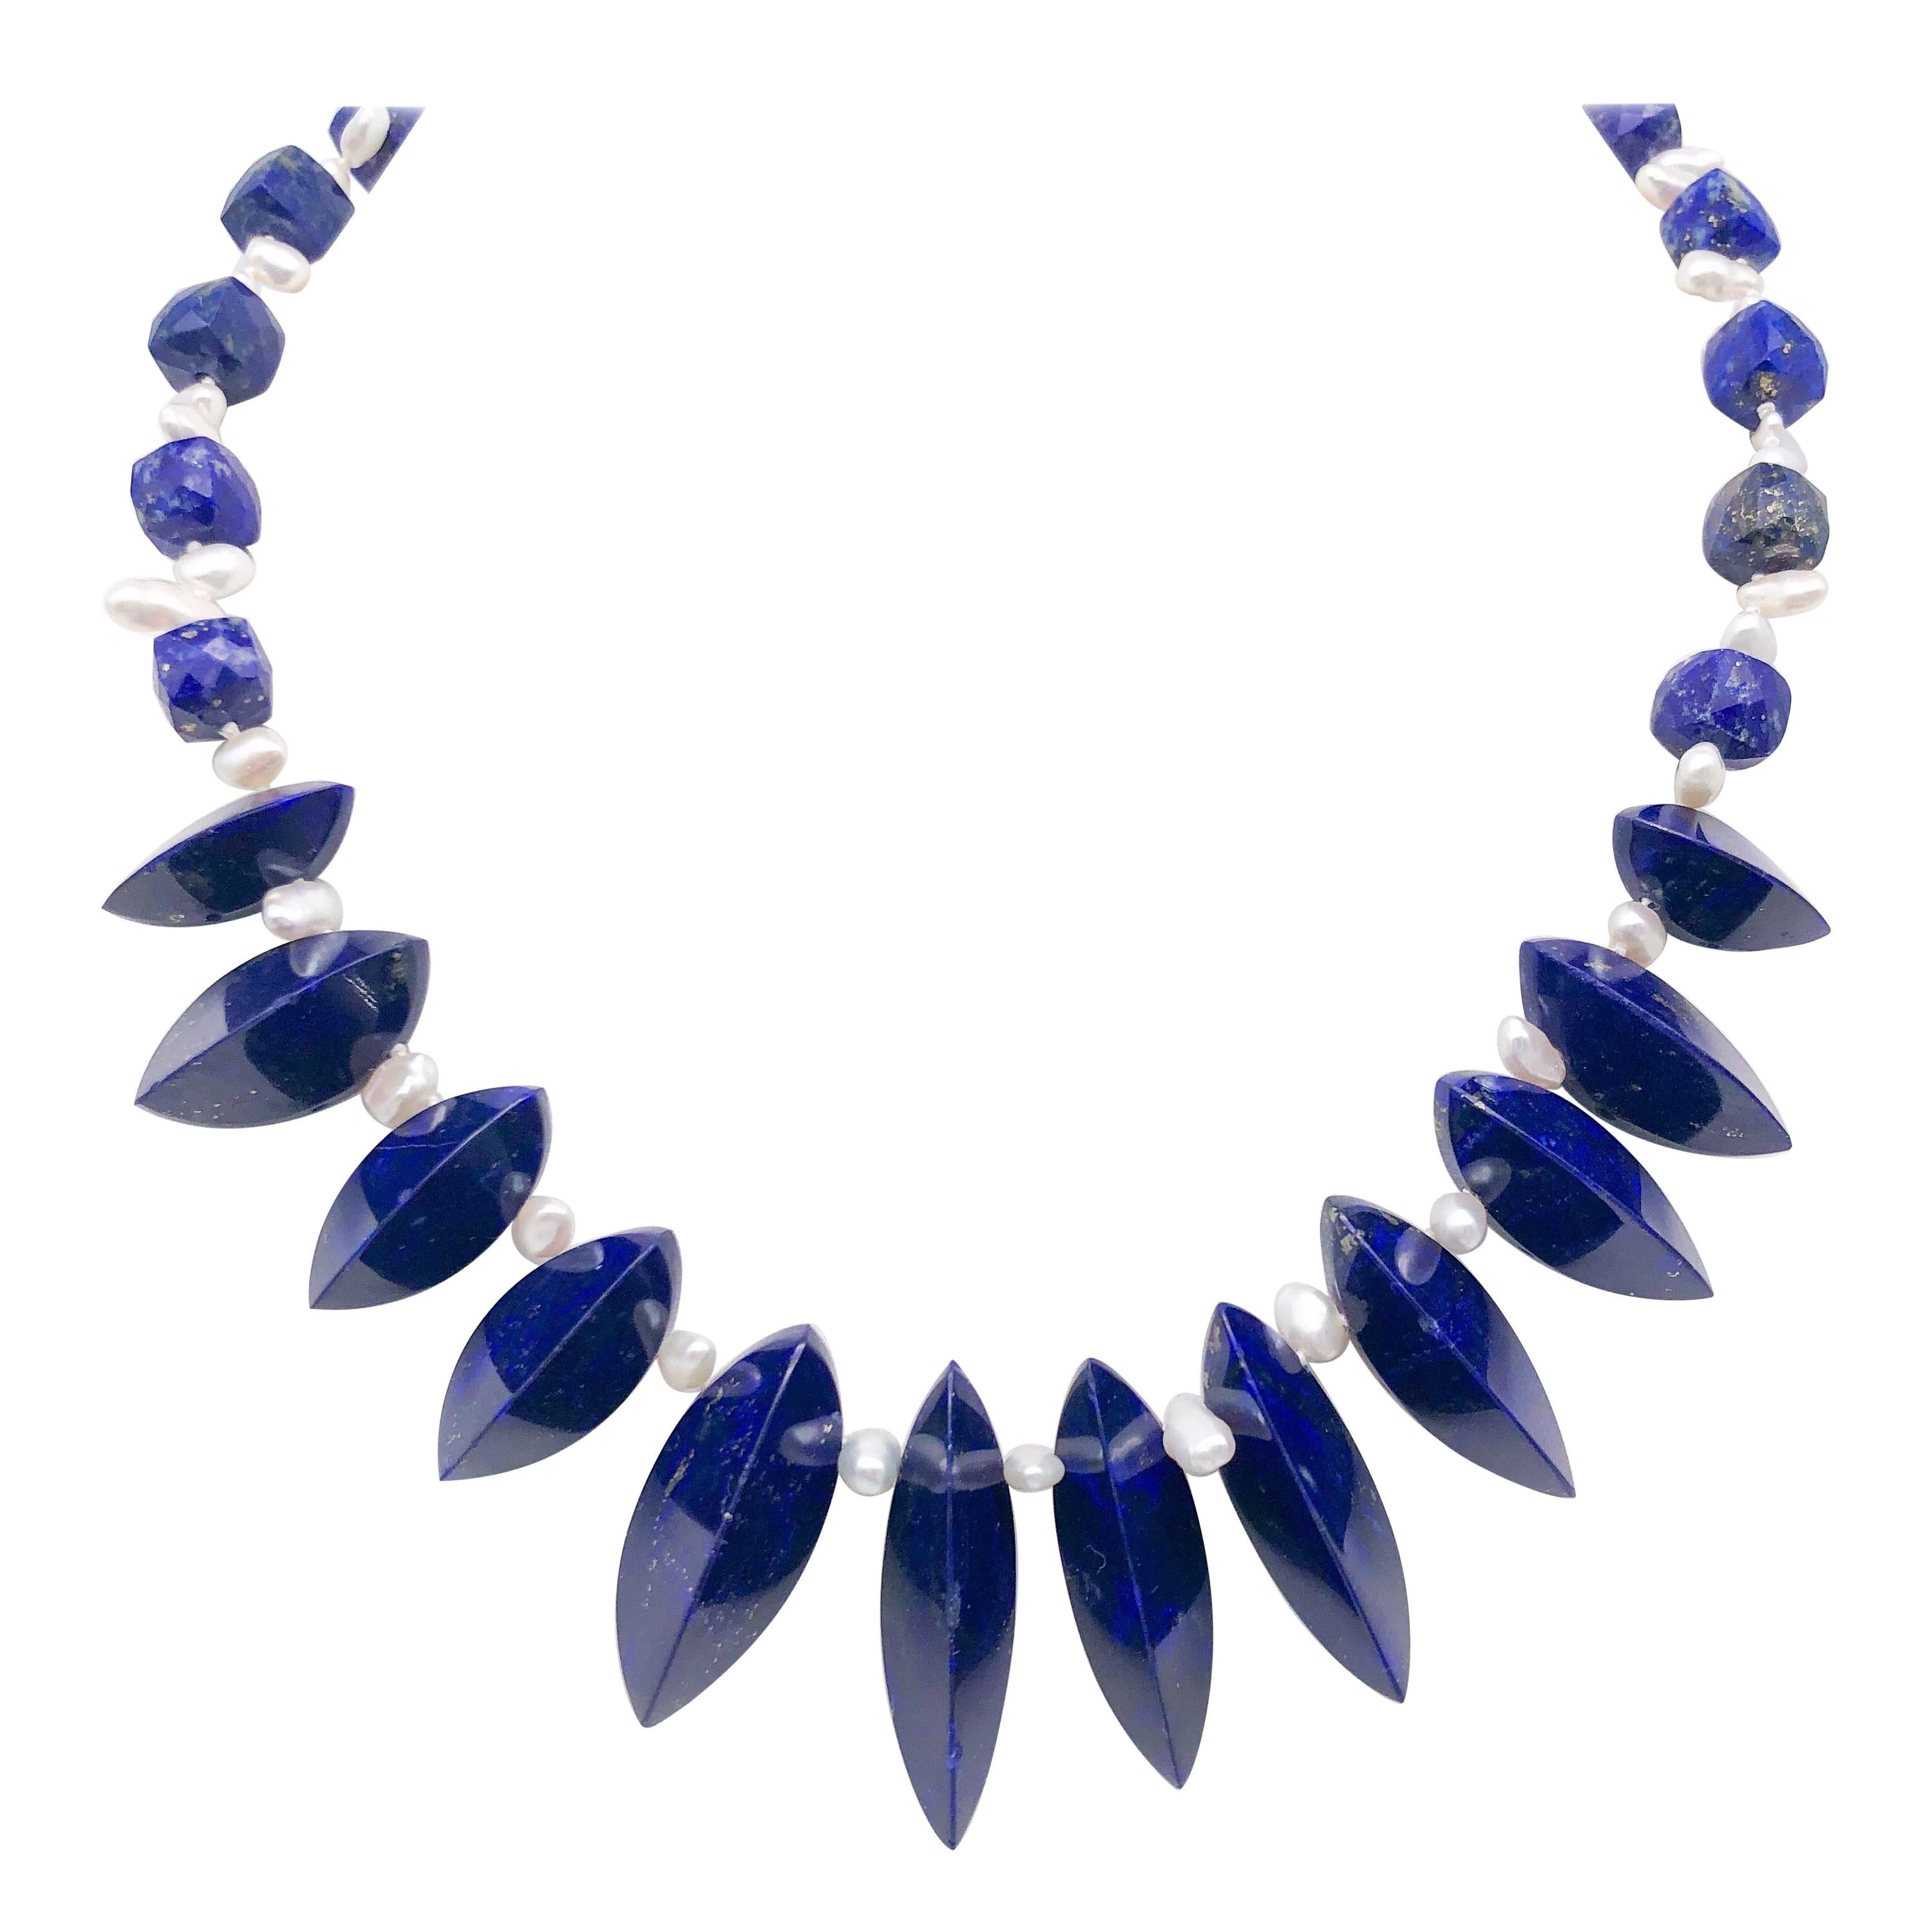 A.Jeschel Unusually cut Lapis beads are strung in a flattering necklace.